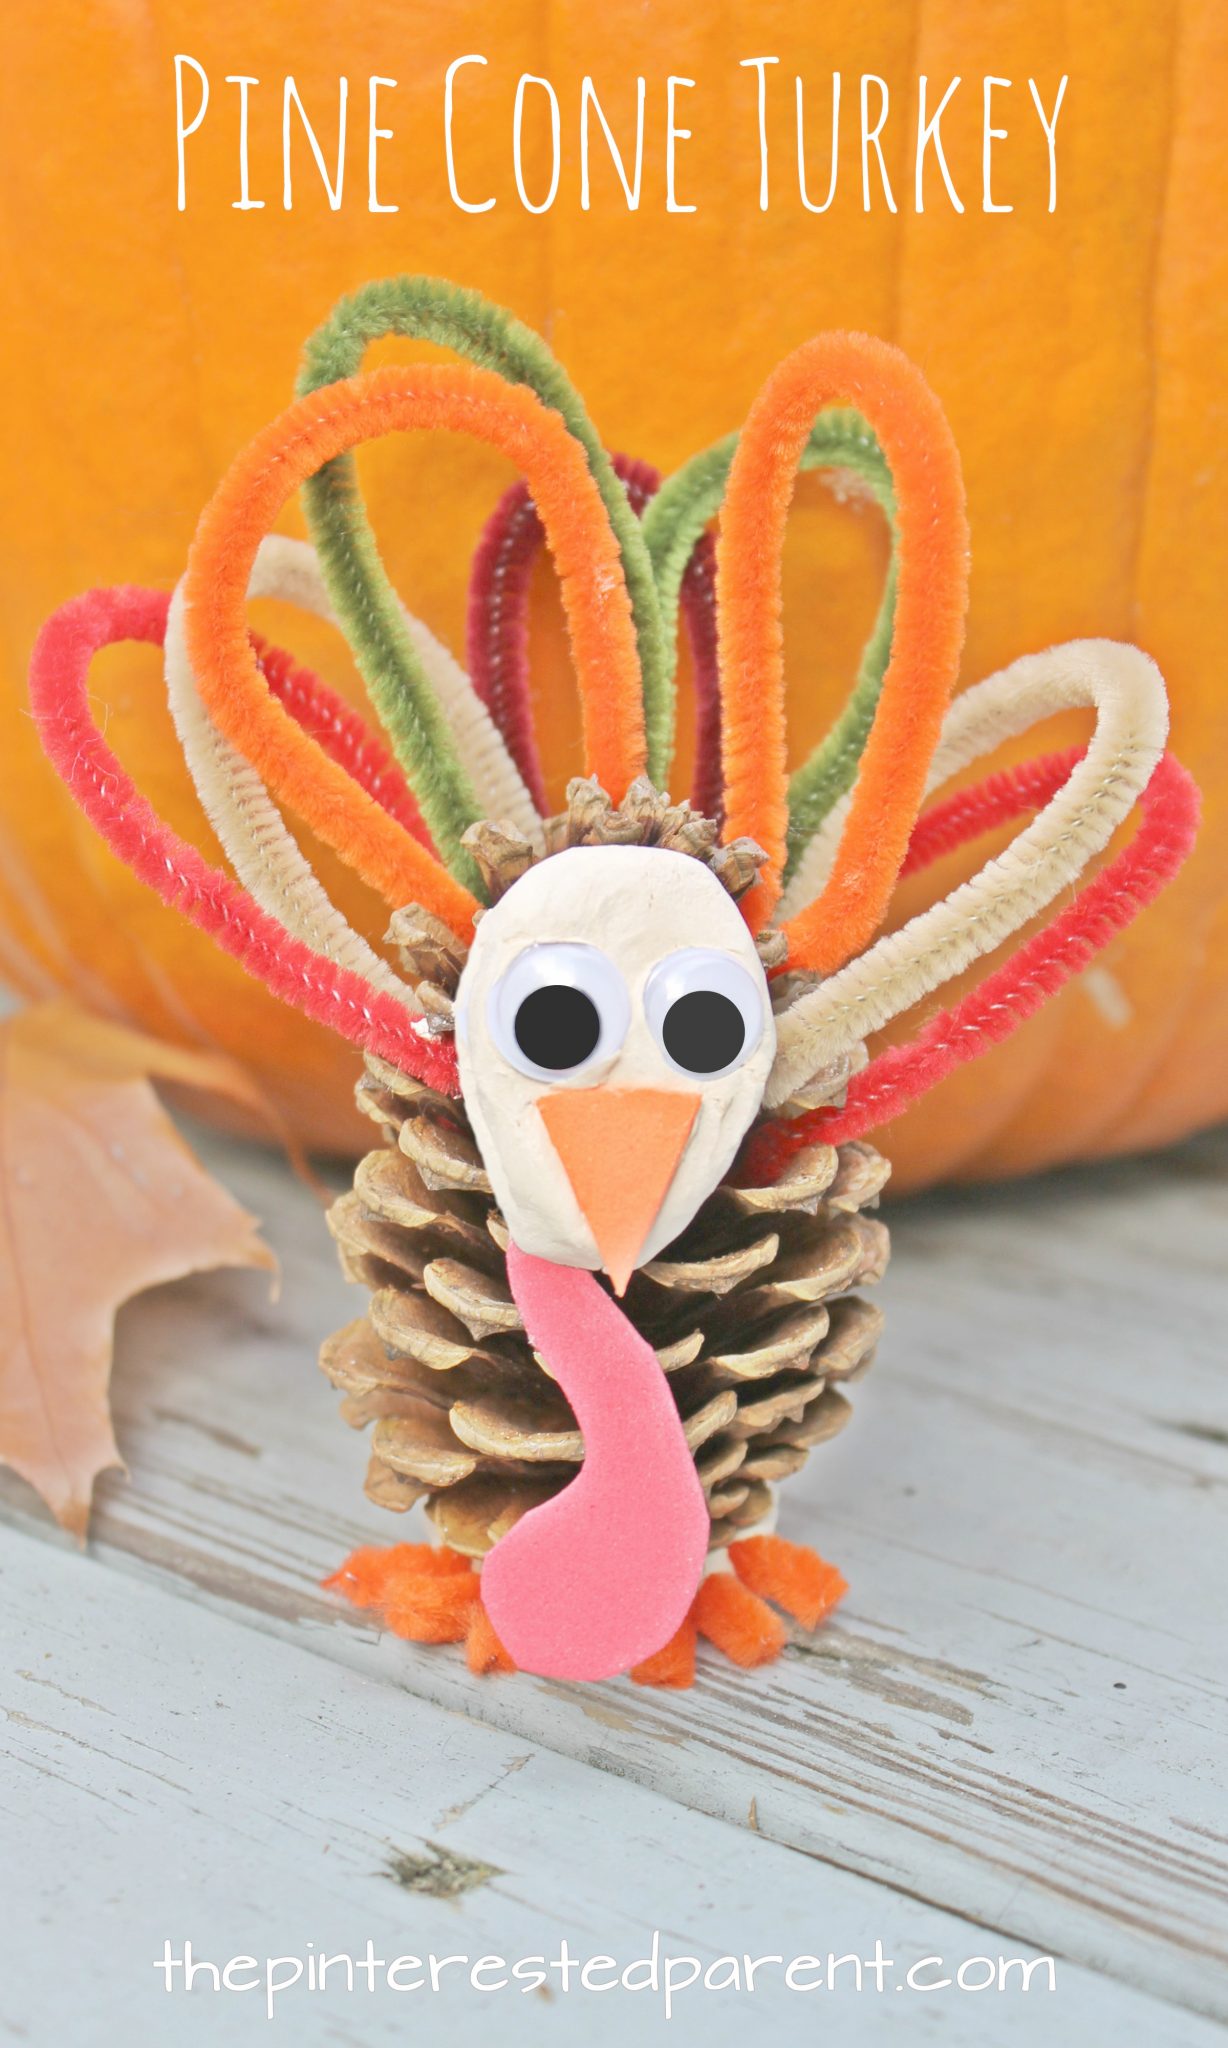 Pinecone and pipe cleaner animals. Check out our other pine cone animals. These are cute and easy to make. Use clay or play dough for this turkey craft for kids. Fall or autumn \, Thanksgiving arts and crafts. Nature